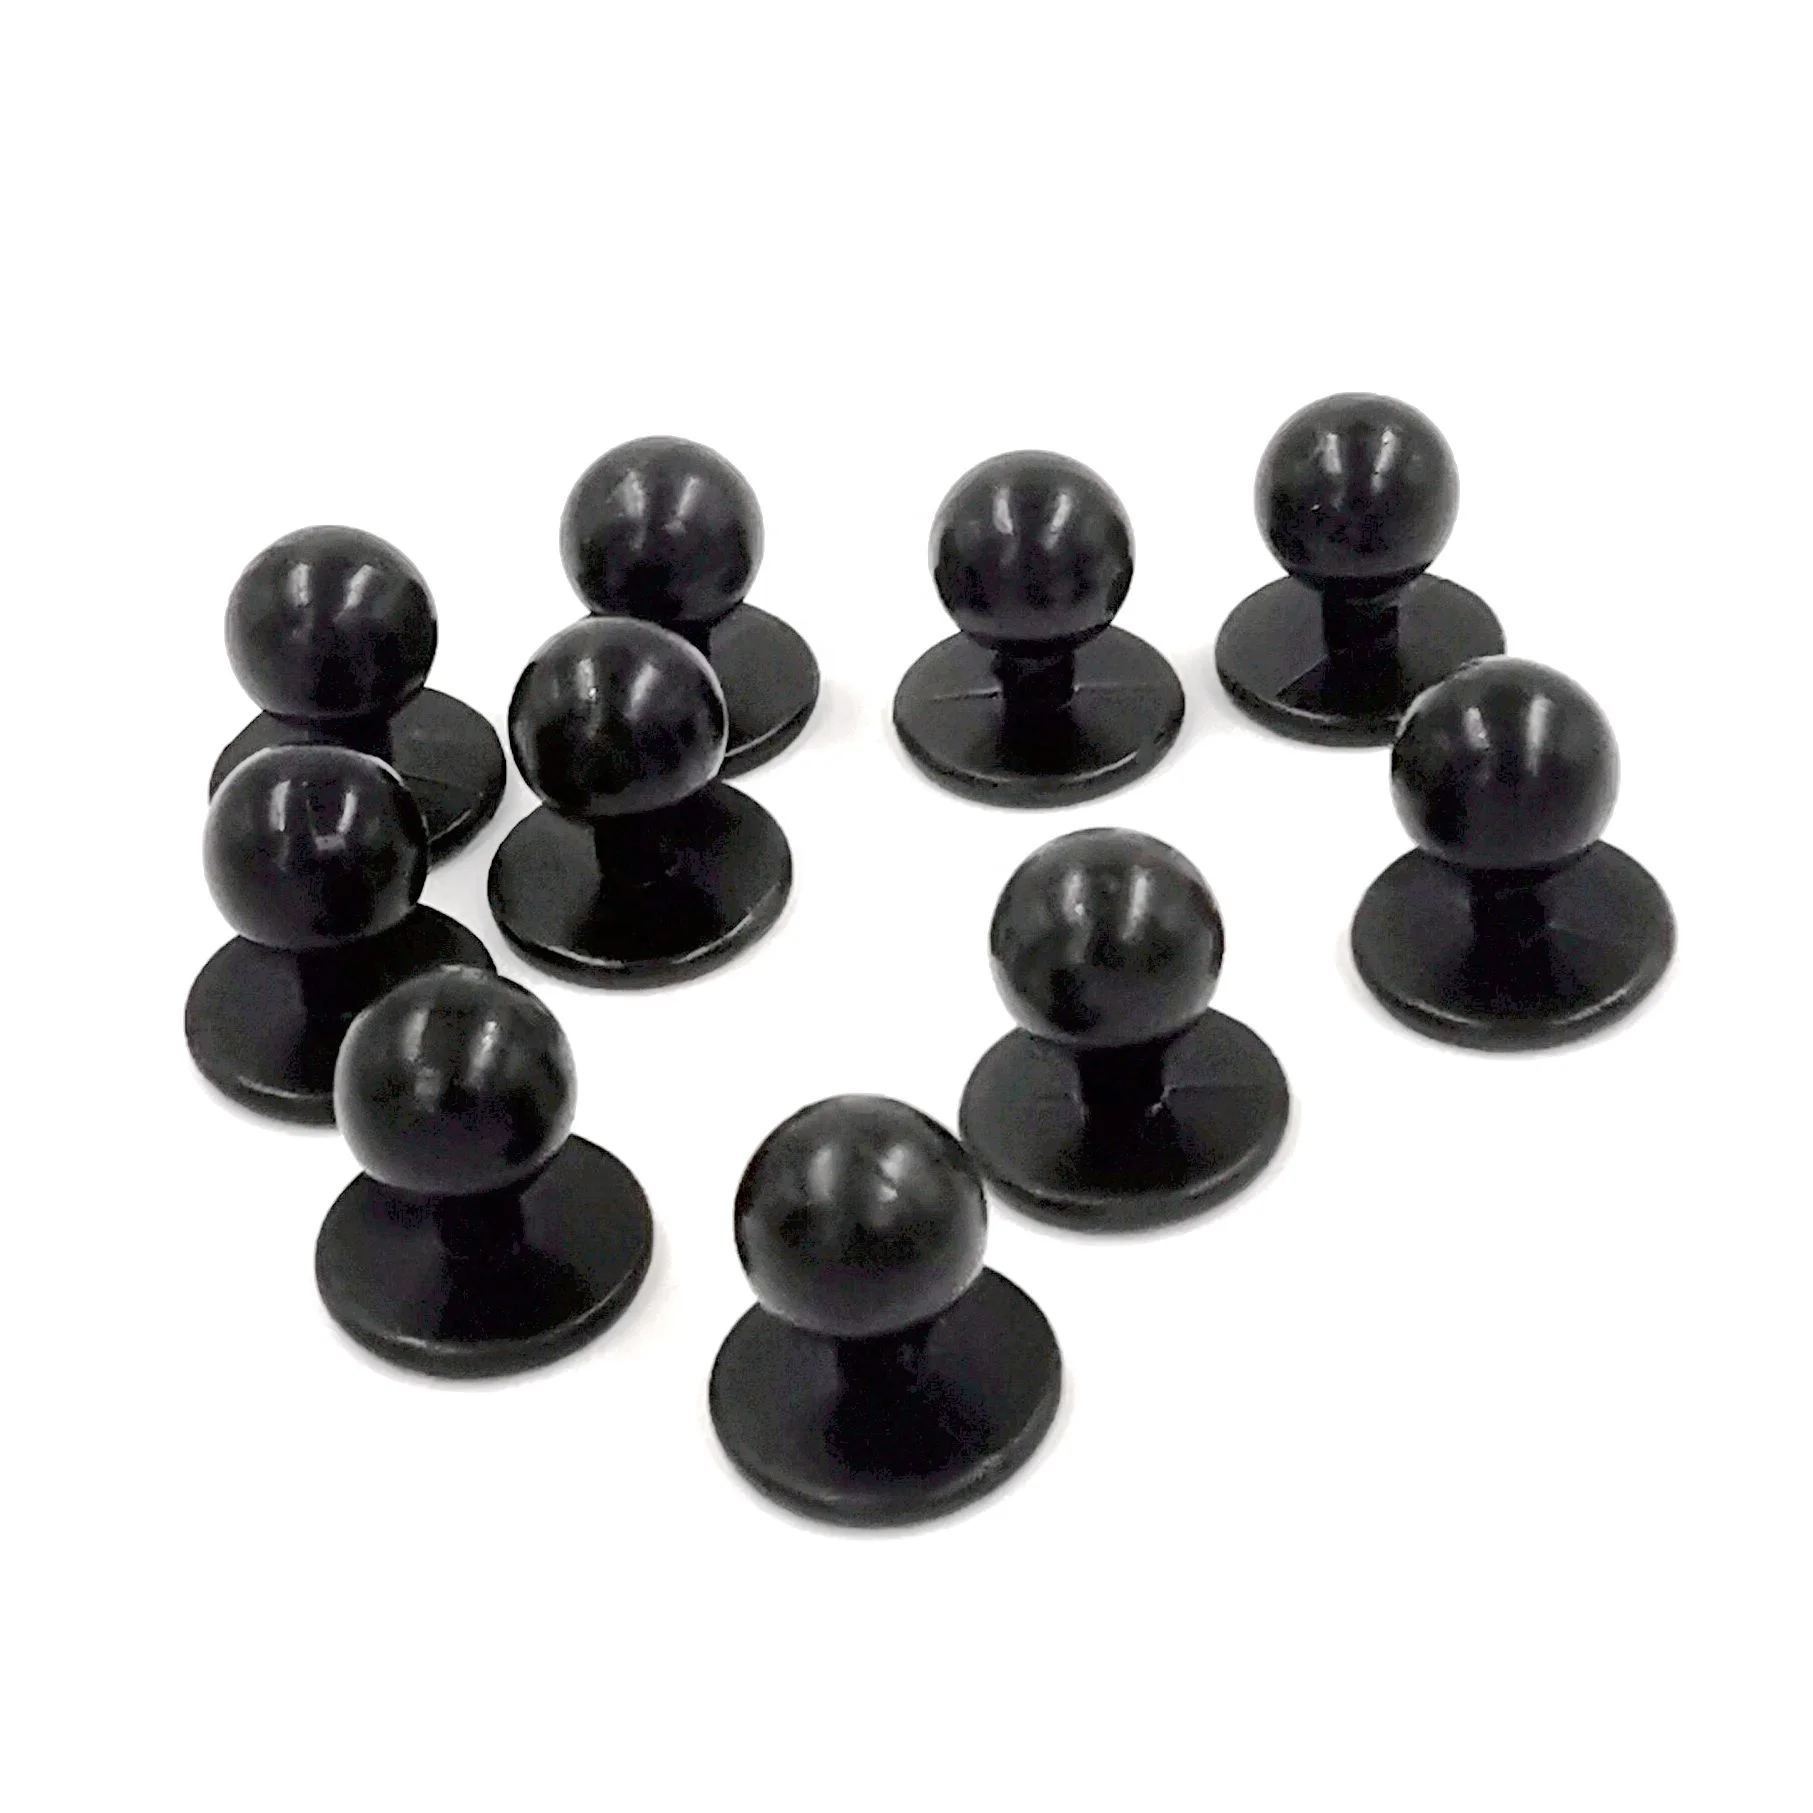 10x Stud Buttons for Chef Coat Jacket Uniform Removable Replacement Studs 